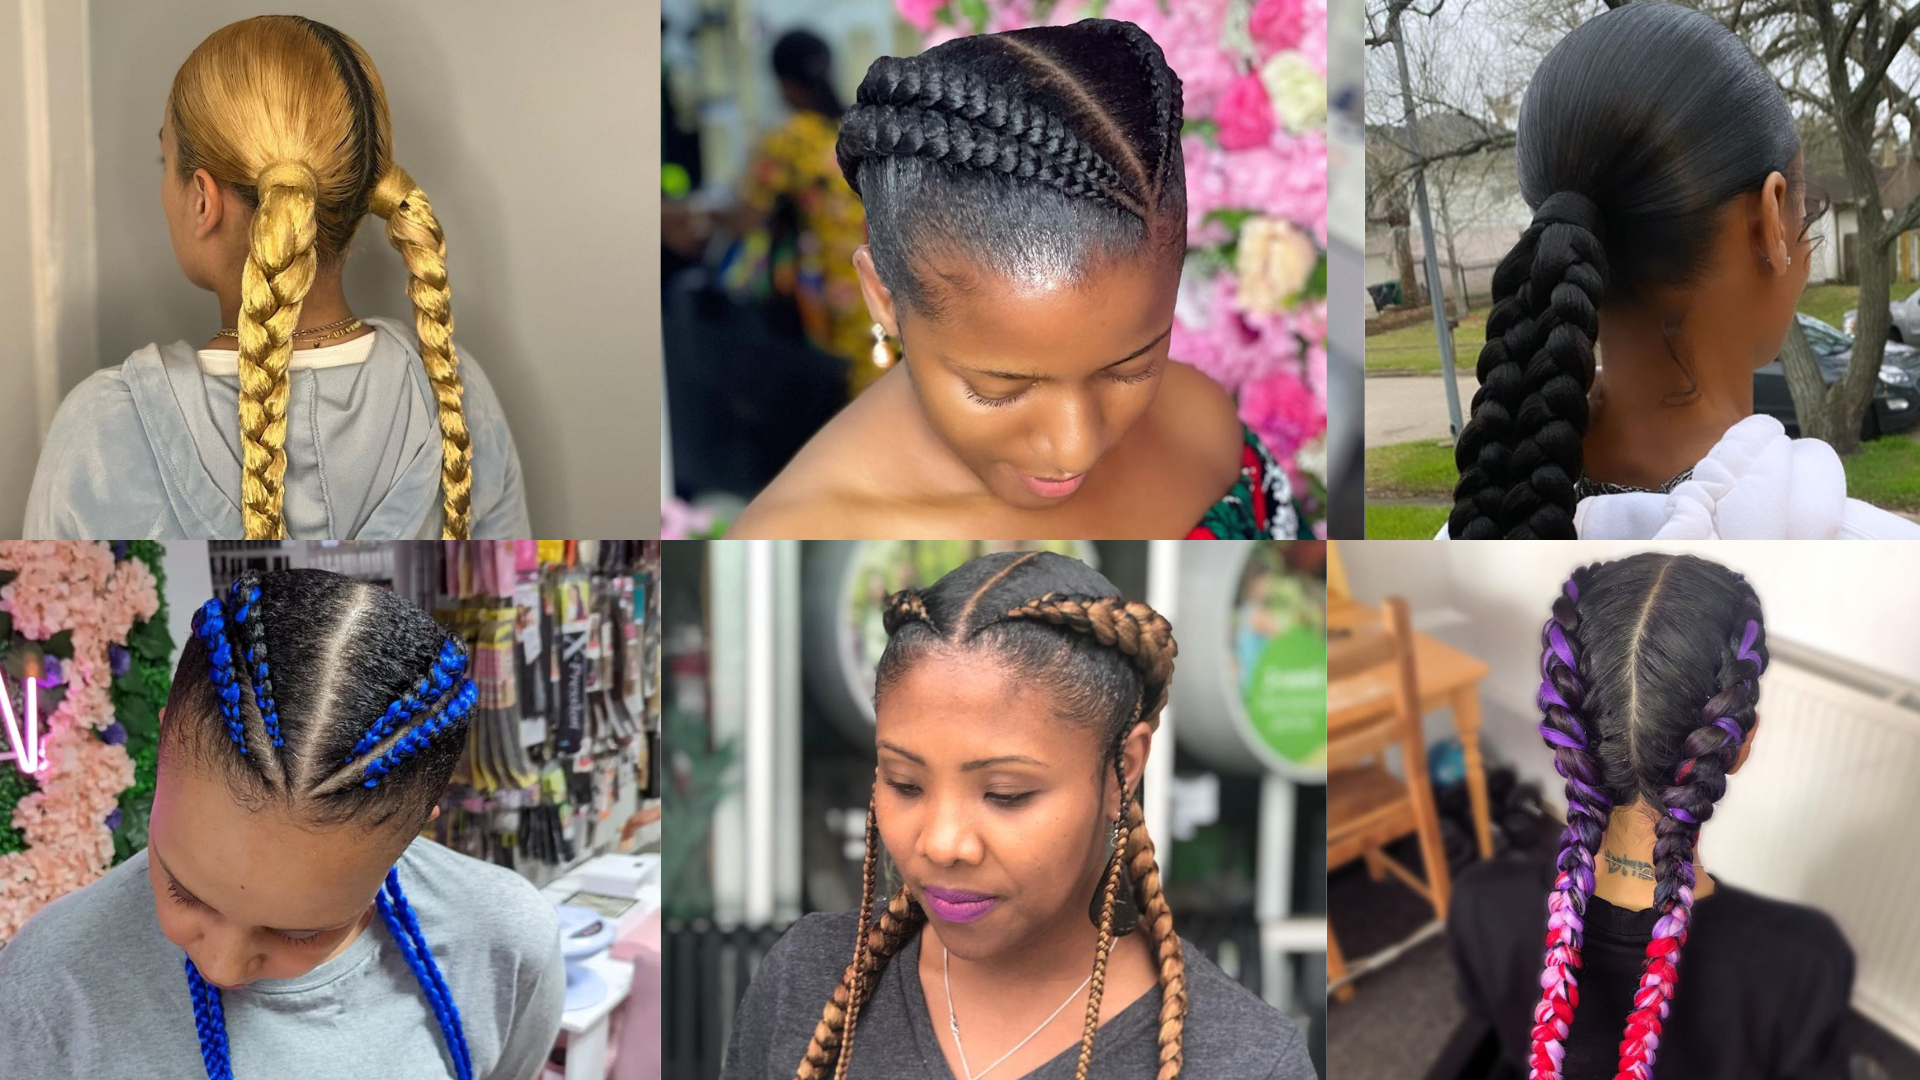 6 simple hairstyles for everyday of the week so you can flaunt a new hairdo  every day